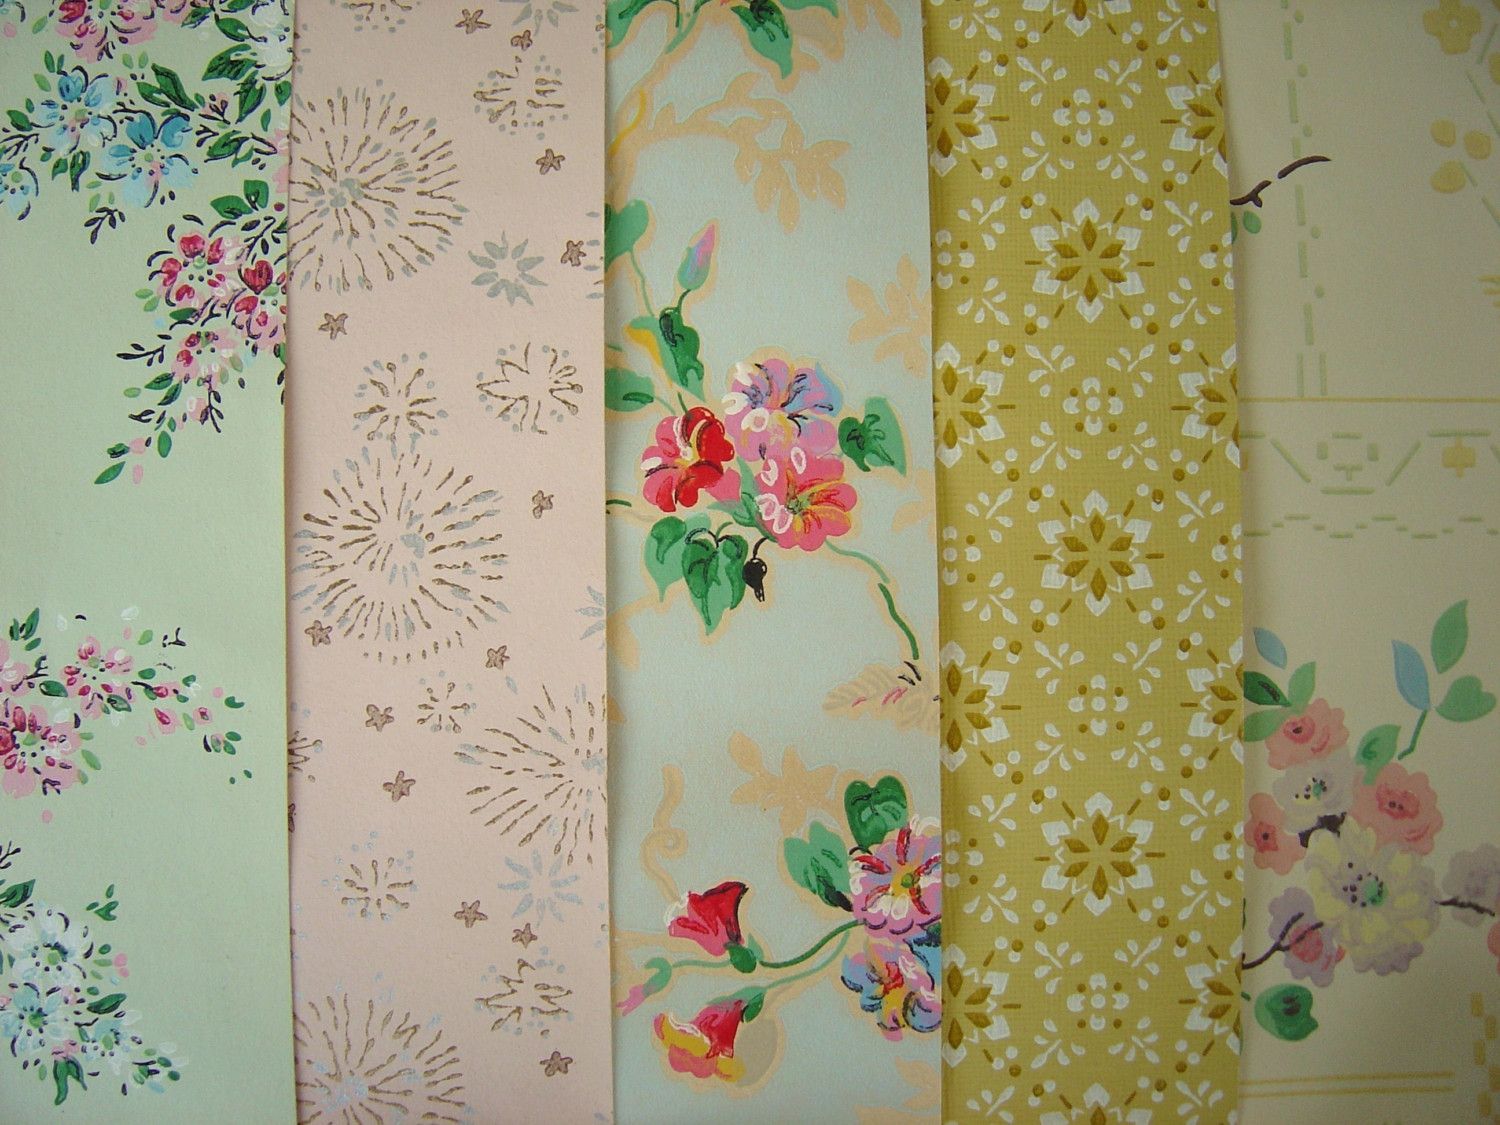 SALE Vintage Wallpaper Packet No. 2 by GoodLuckStudio on Etsy